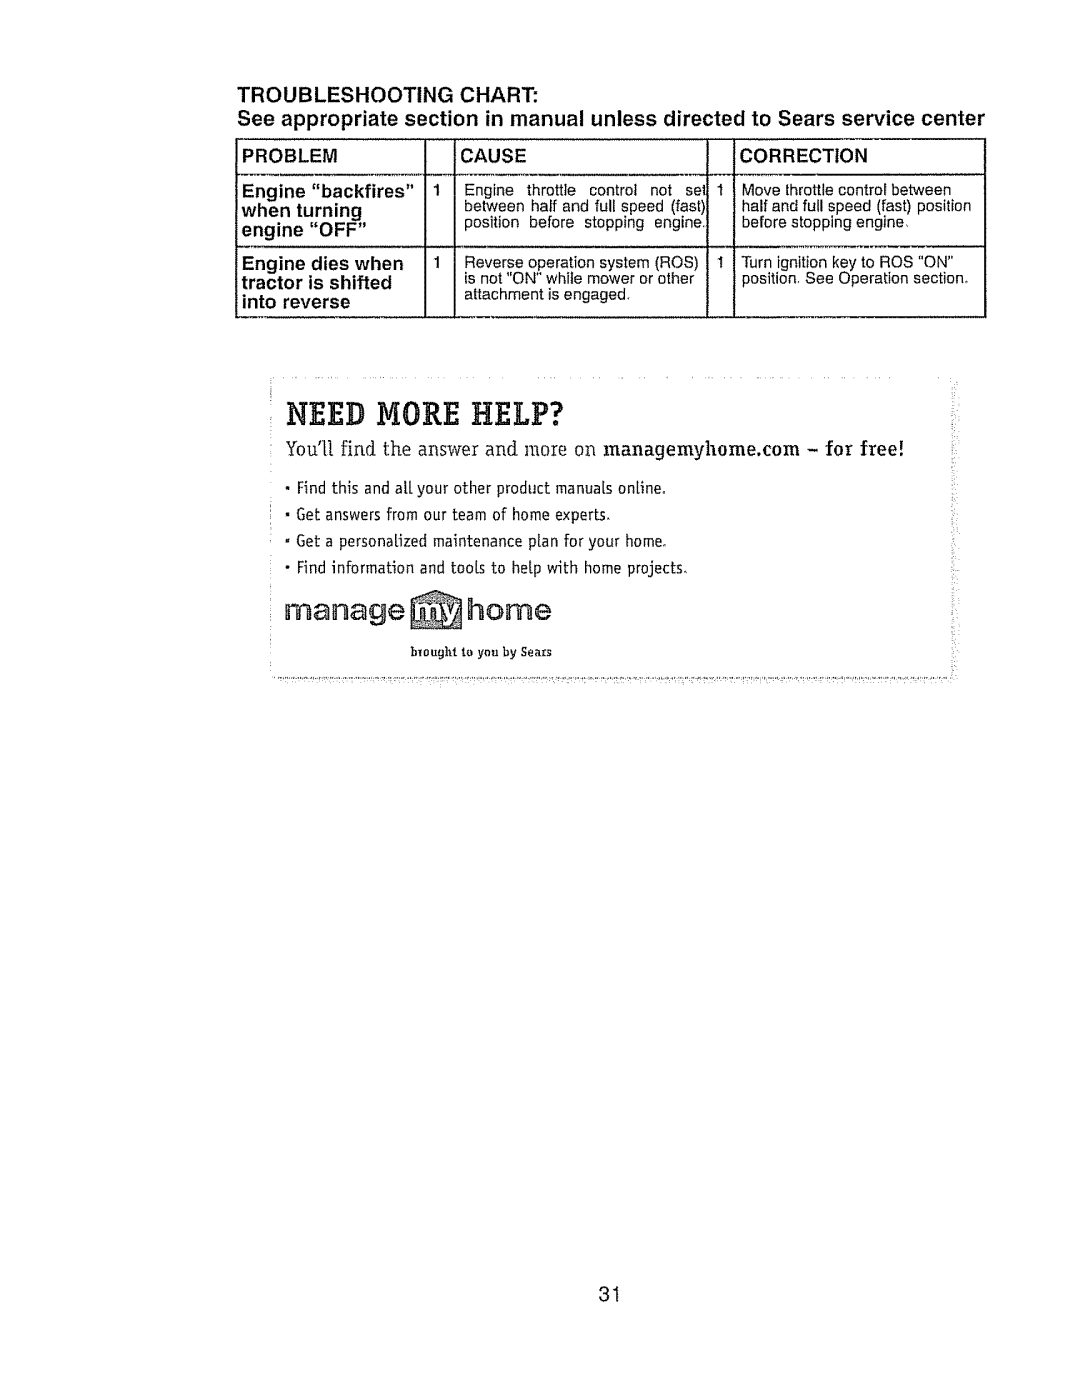 Craftsman 917.289030, 917.289031 owner manual manage home, Need More Help?, Troubleshooting Chart 